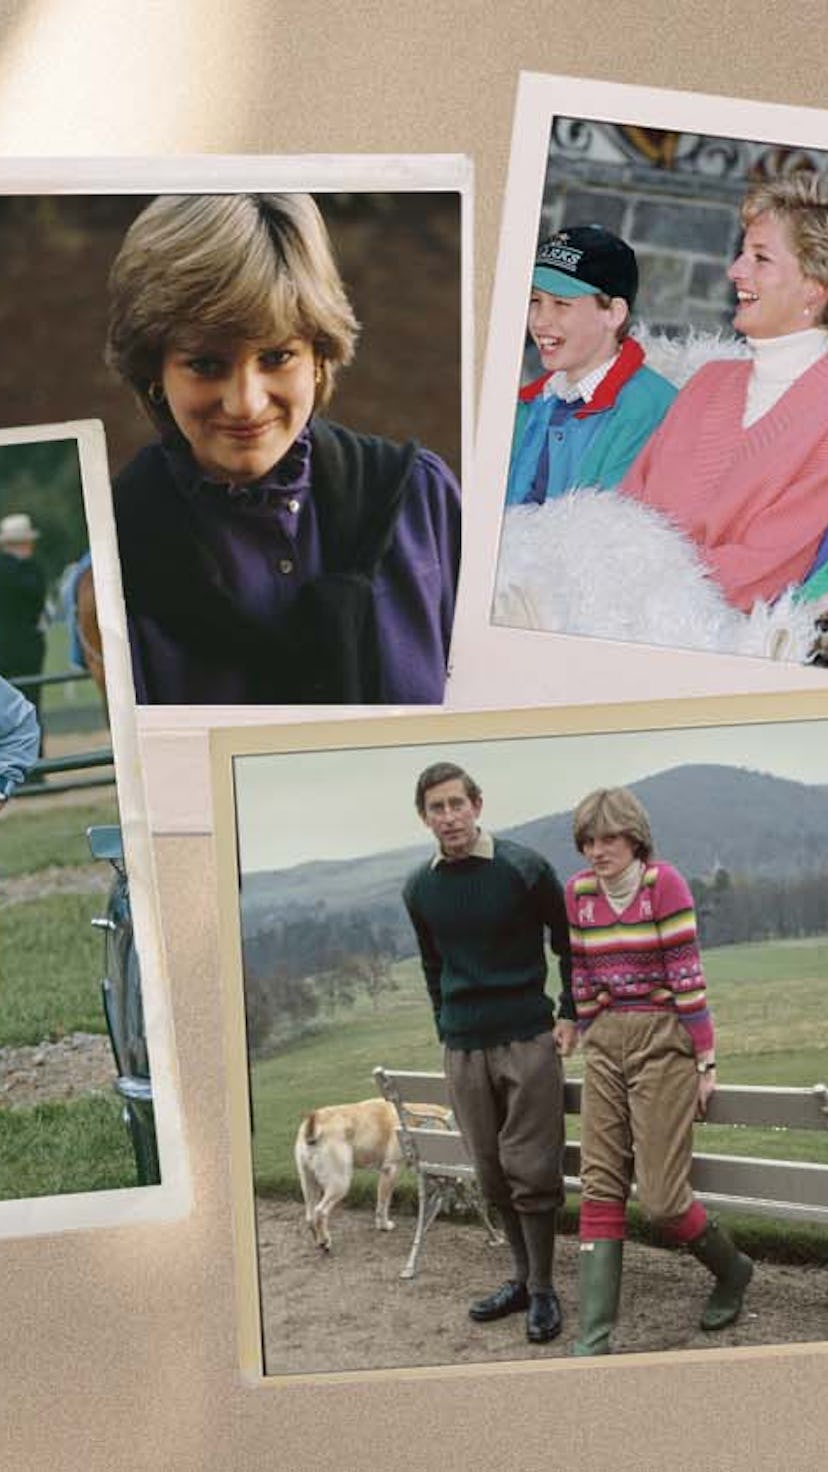 A collage of images portraying Princess Diana alone and with her royal family